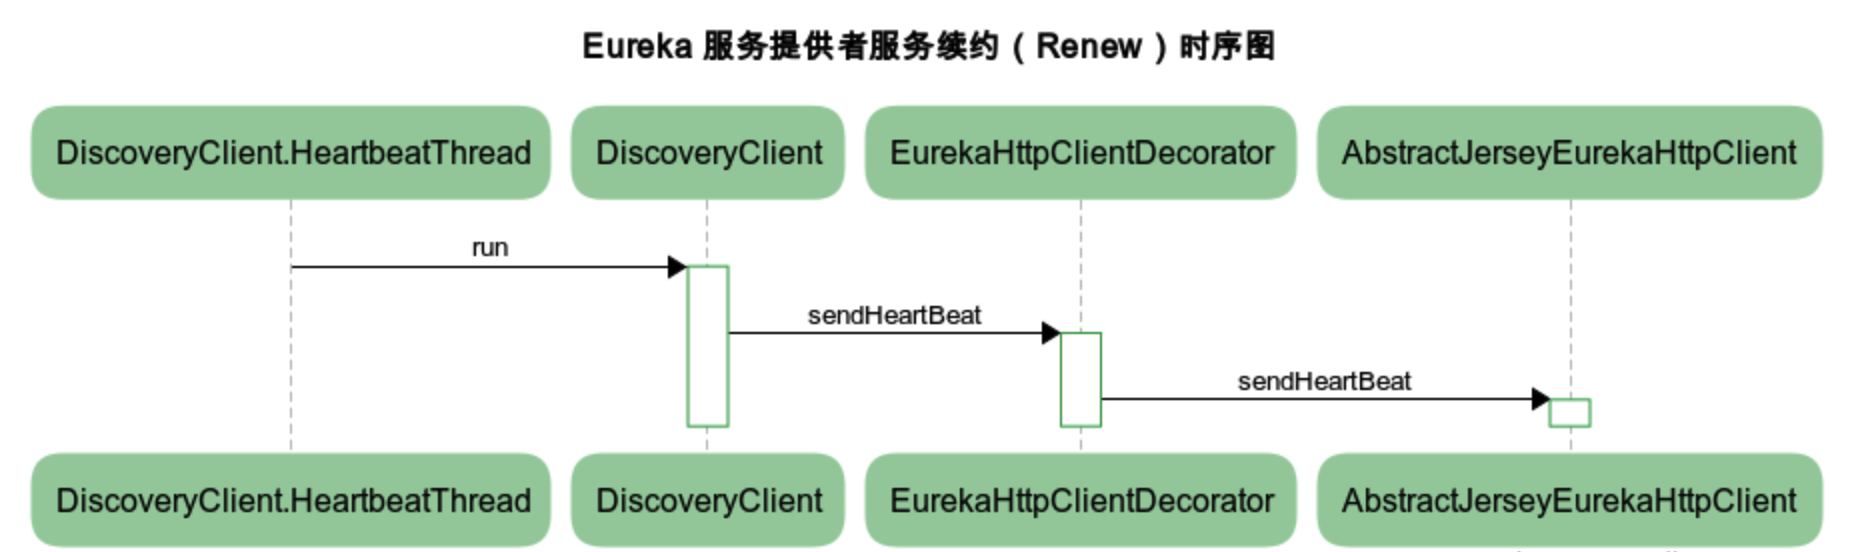 service-provider-renew-sequence-chart.png